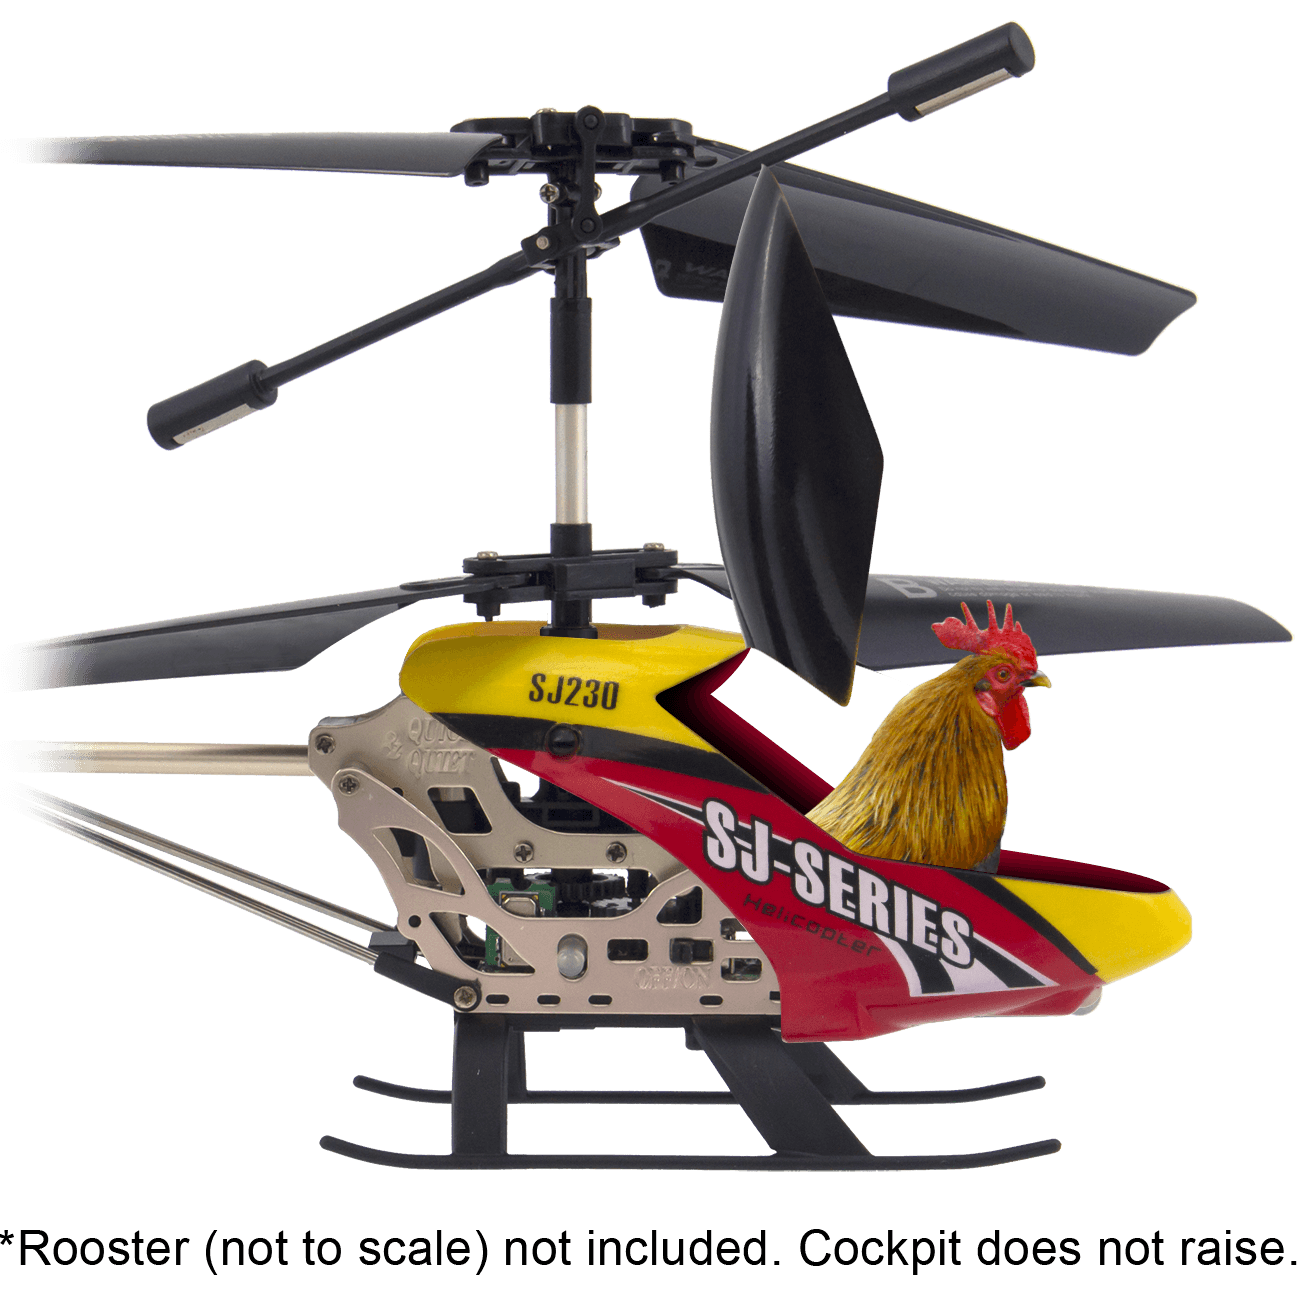 sj series remote control helicopter manual